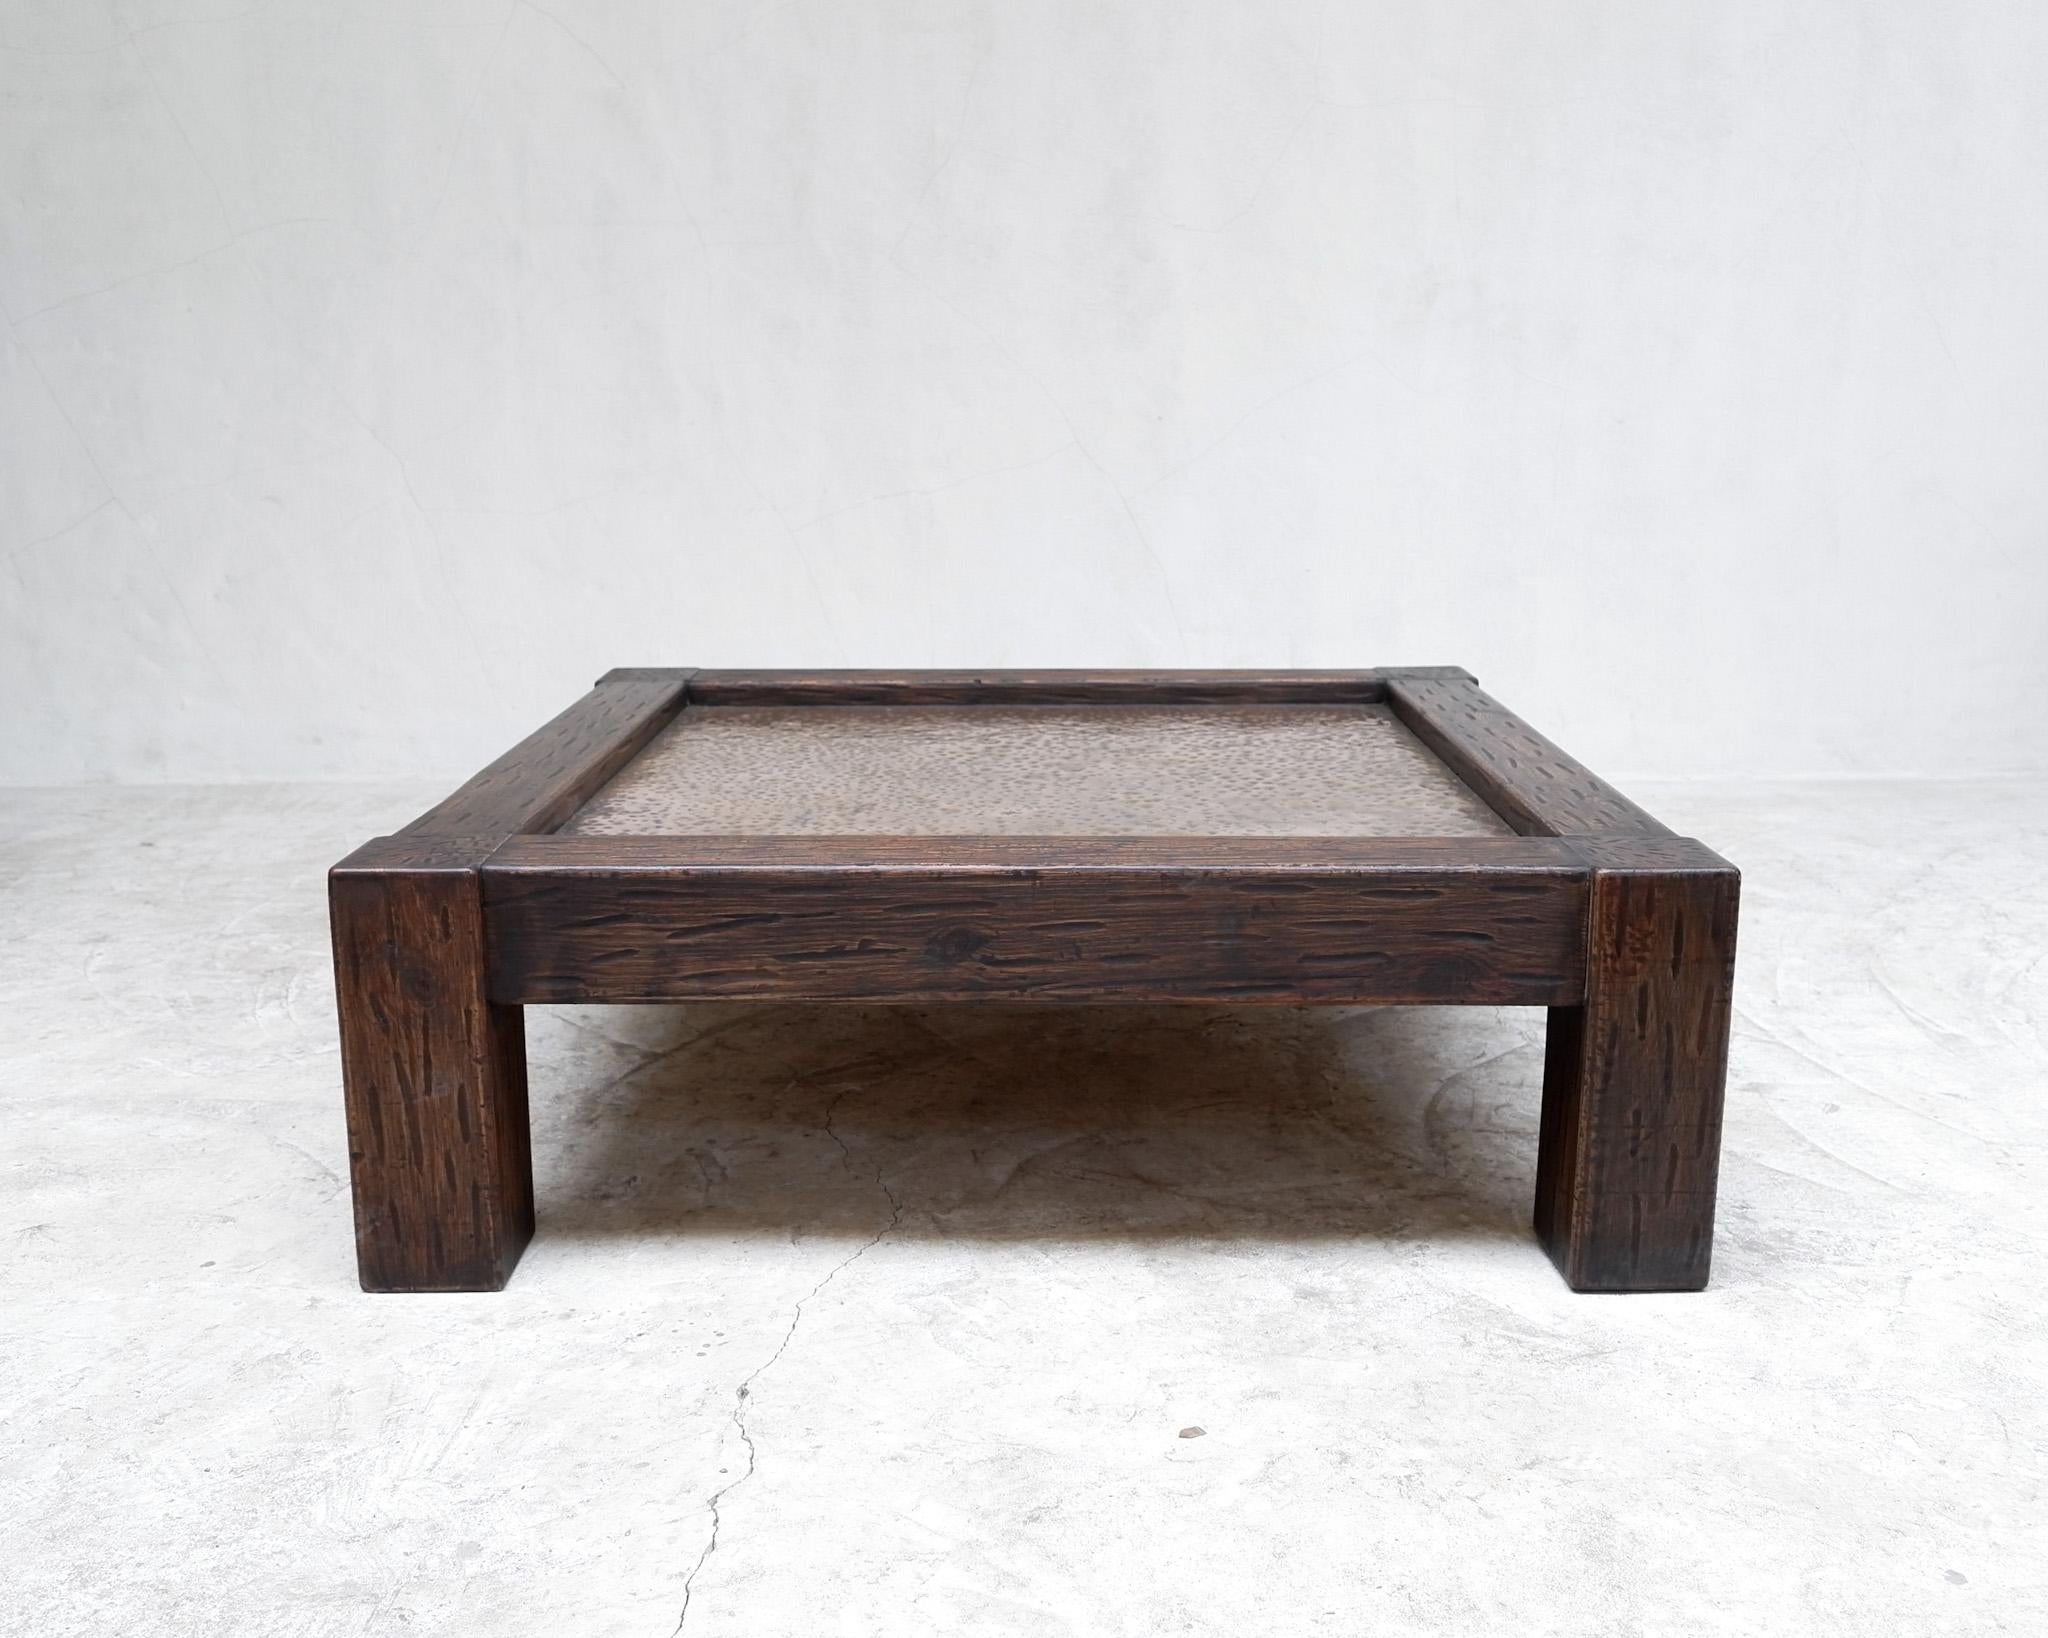 A large hewn pine coffee table with hammered copper insert. 

Spain 1970s.

-

We offer free shipping to the USA/Canada through Fedex with this item.